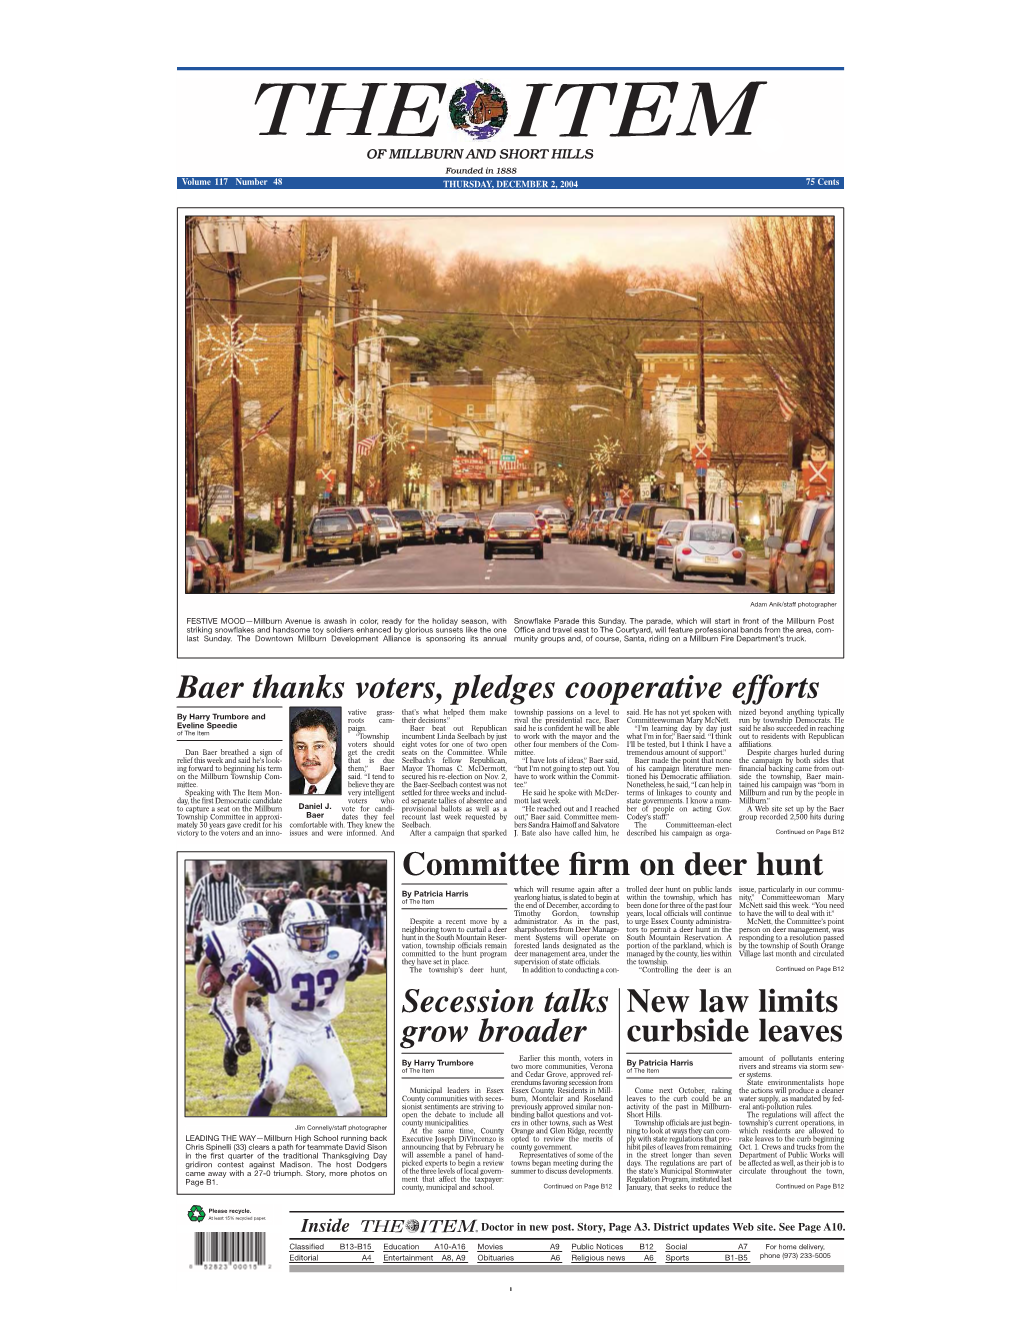 Baer Thanks Voters, Pledges Cooperative Efforts Committee Firm on Deer Hunt Secession Talks Grow Broader New Law Limits Curbside